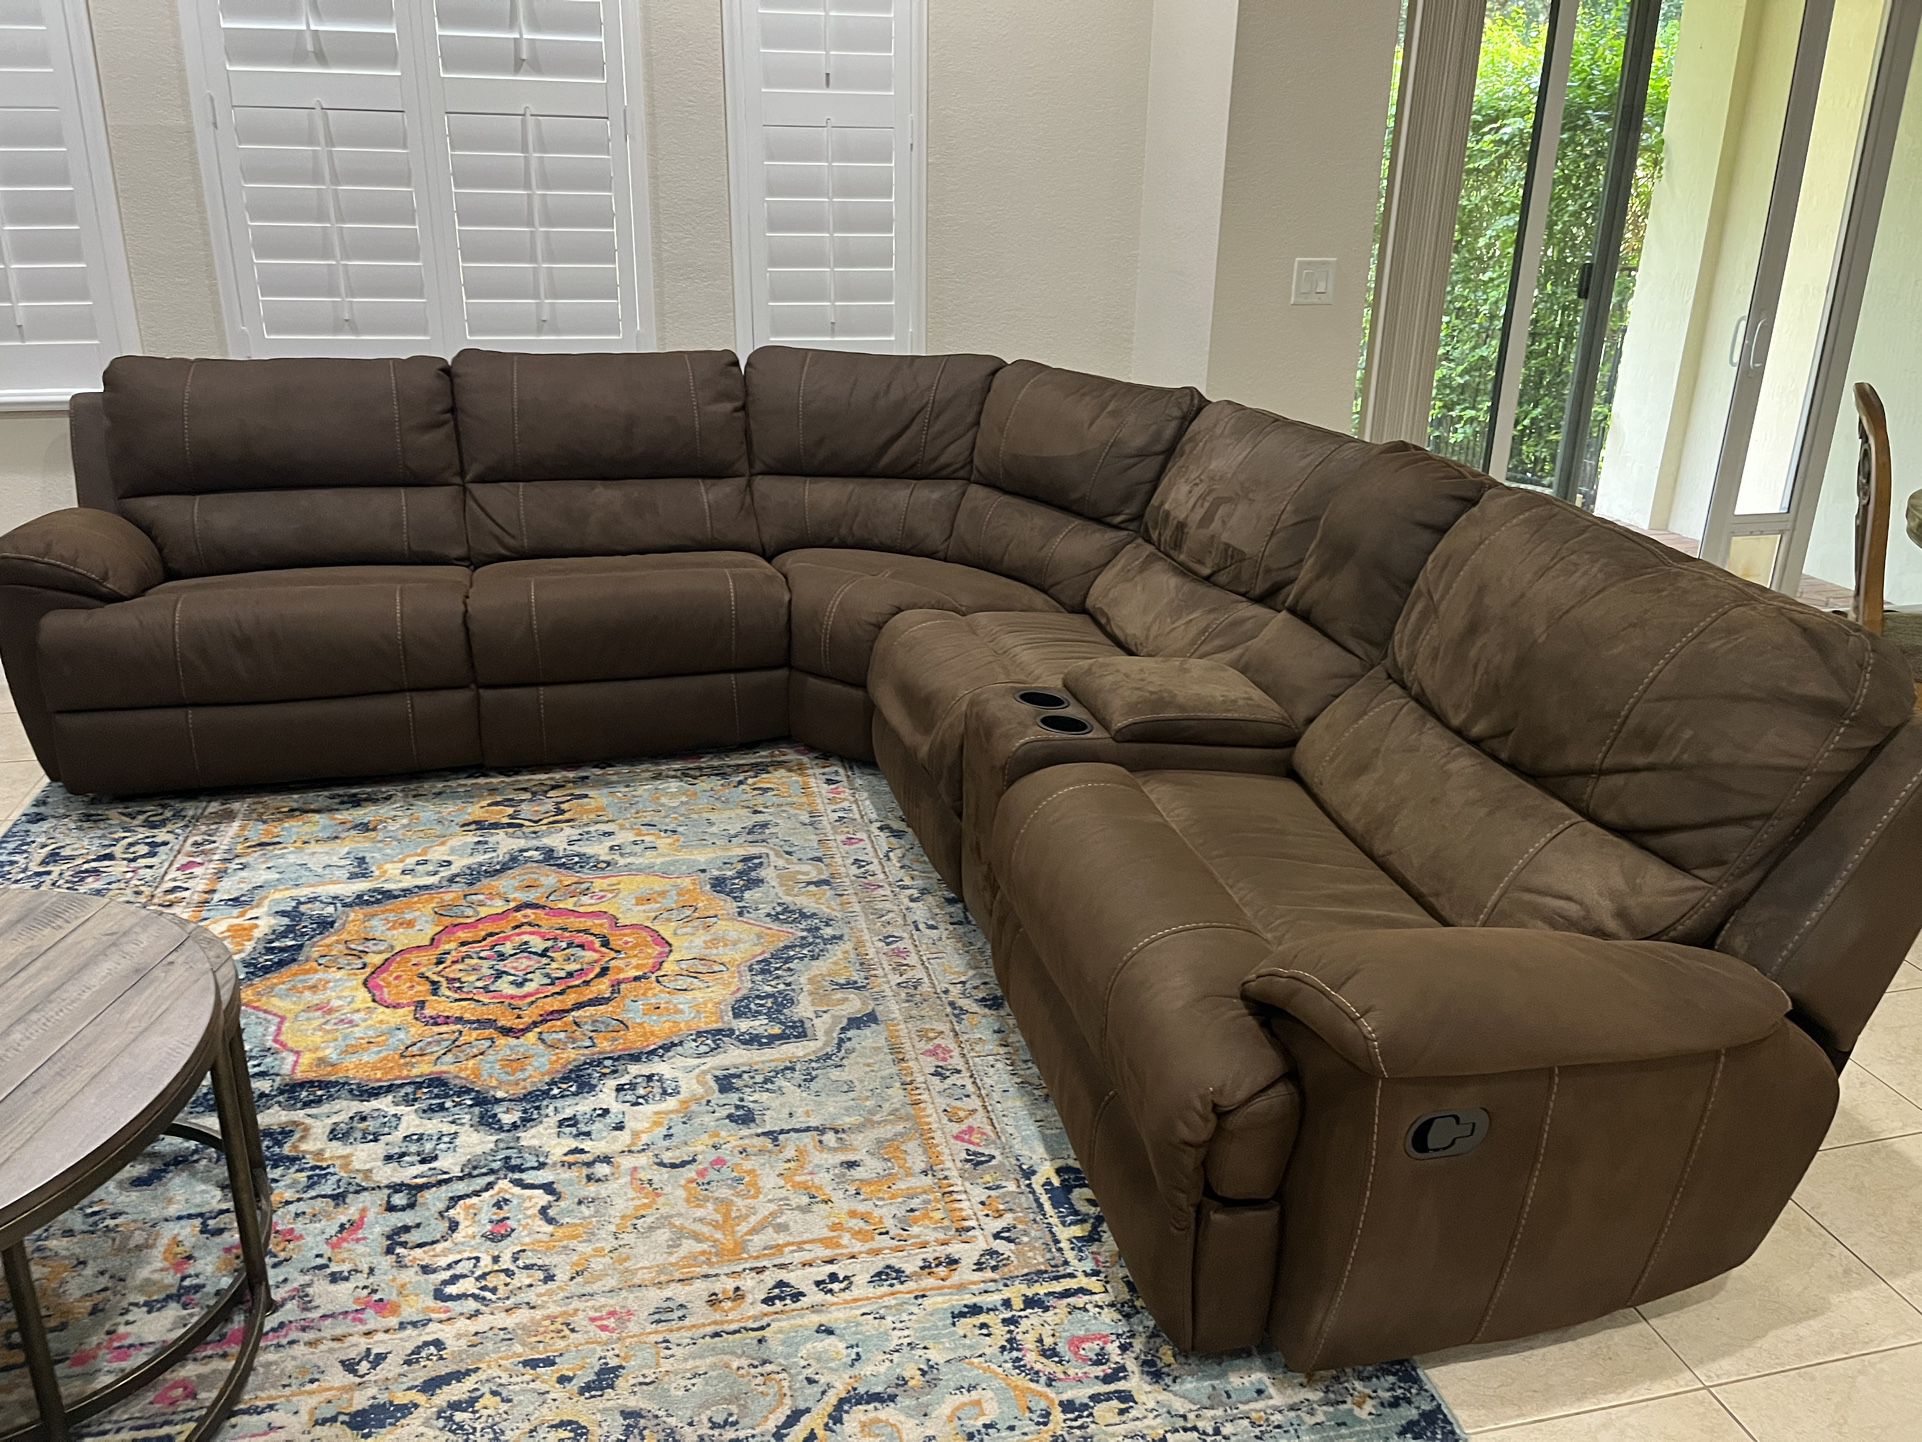 Large Brown Microfiber Sectional Couch